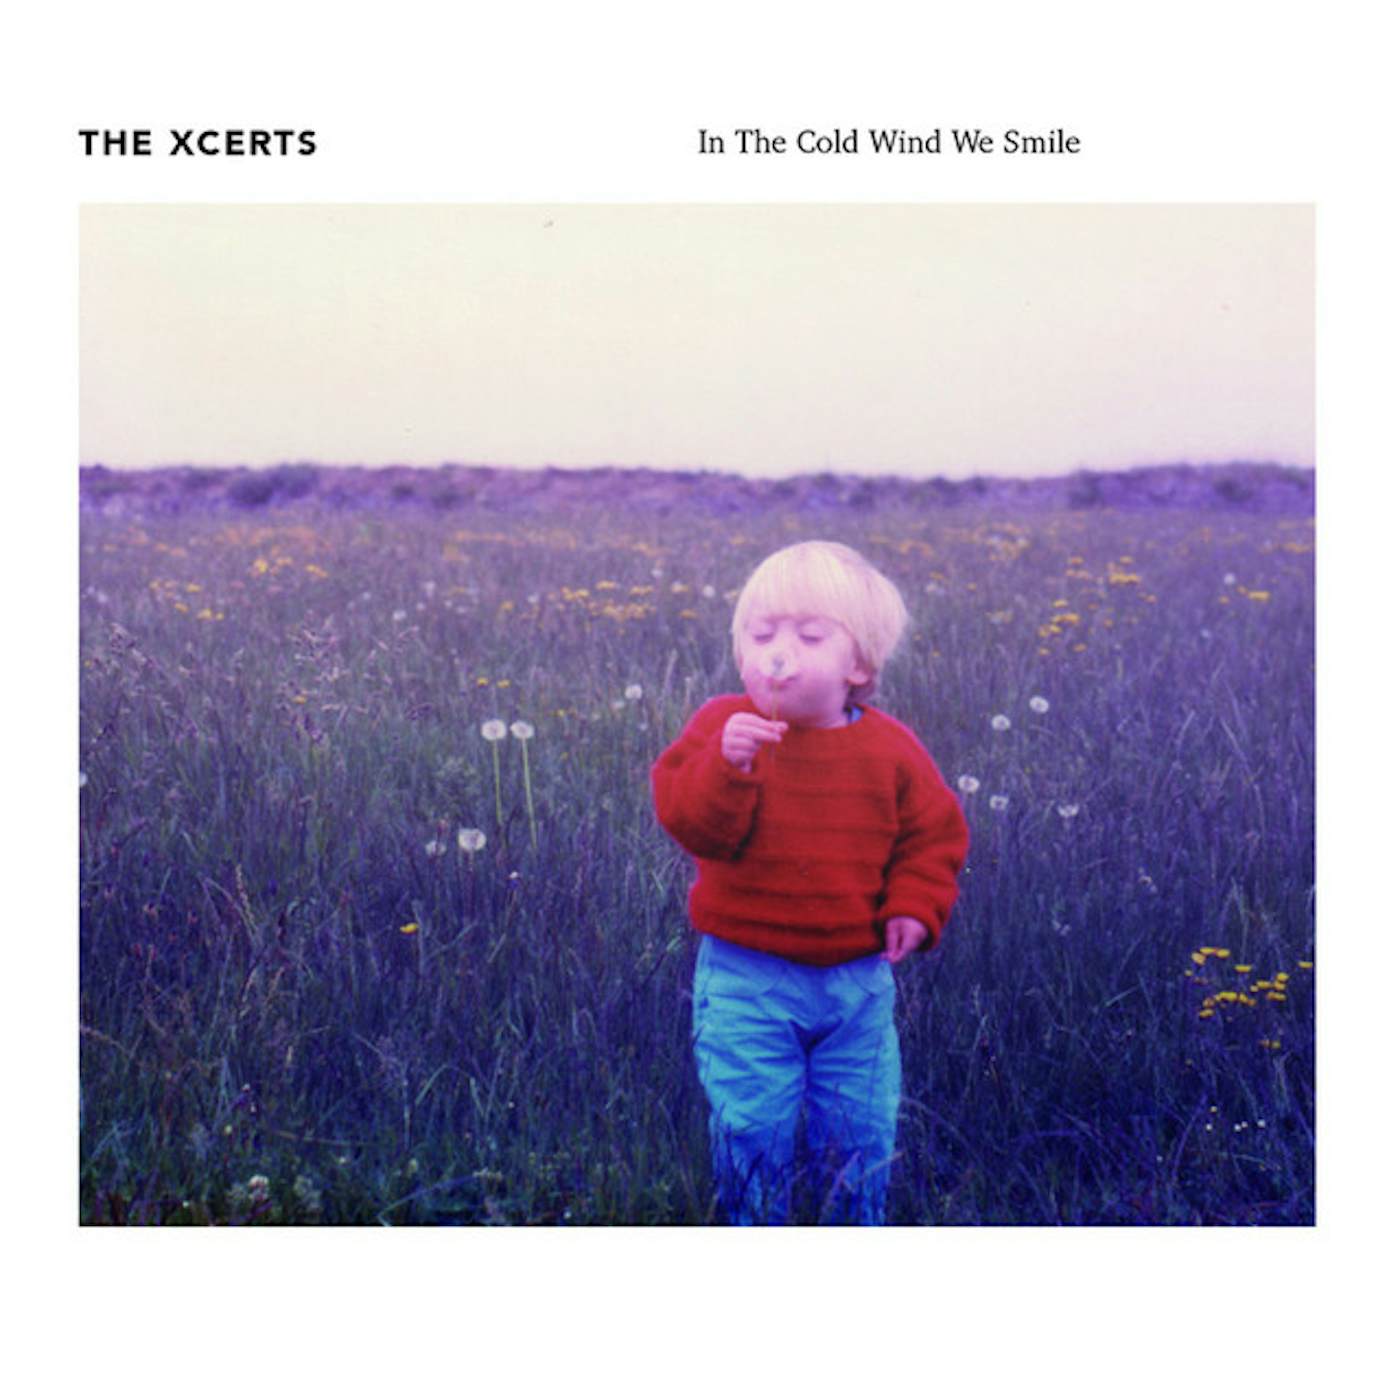 The XCERTS IN THE COLD WIND WE SMILE CD